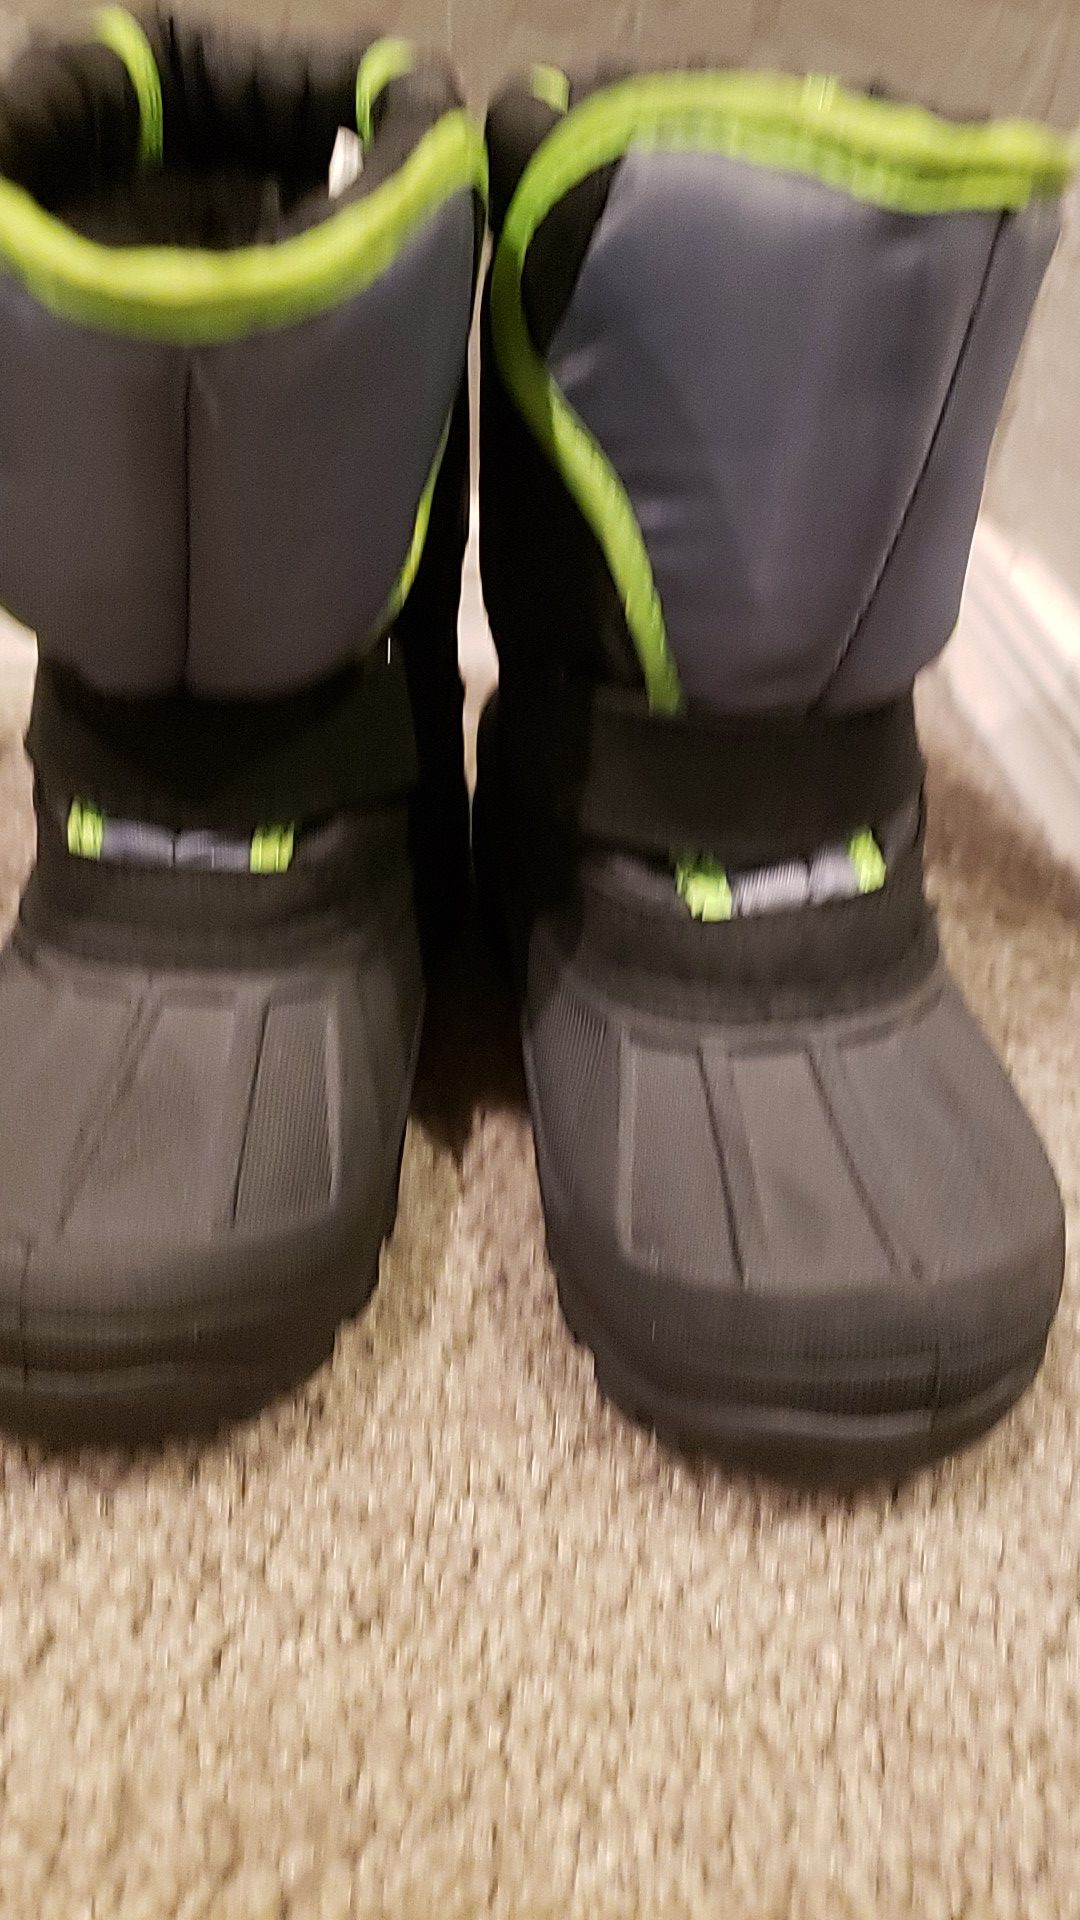 Snow boots for kids. Size 9